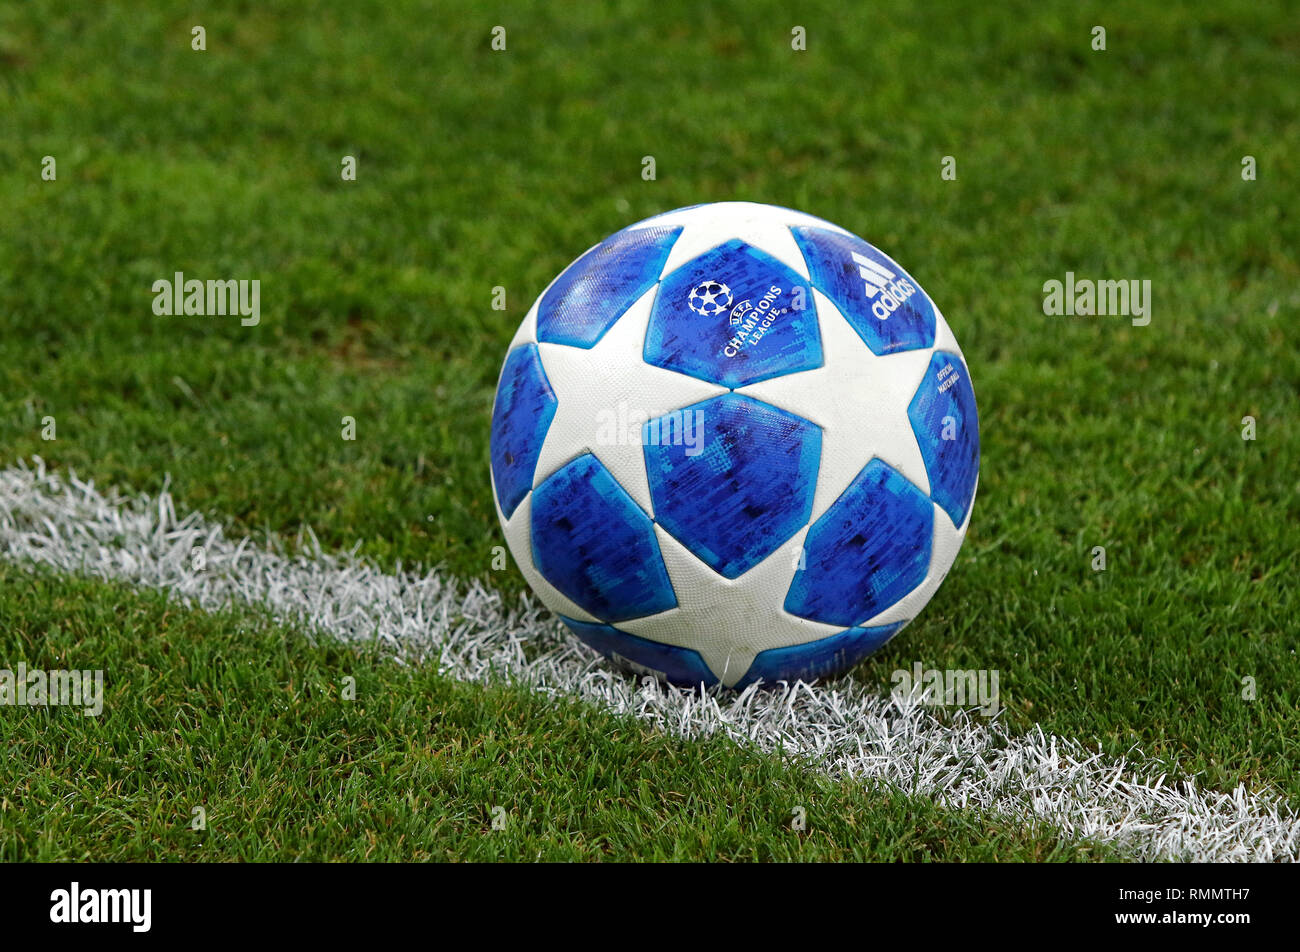 Kyiv Ukraine August 28 18 Official Uefa Champions League 18 19 Season Match Ball On The Grass During The Uefa Champions League Play Off Game Stock Photo Alamy